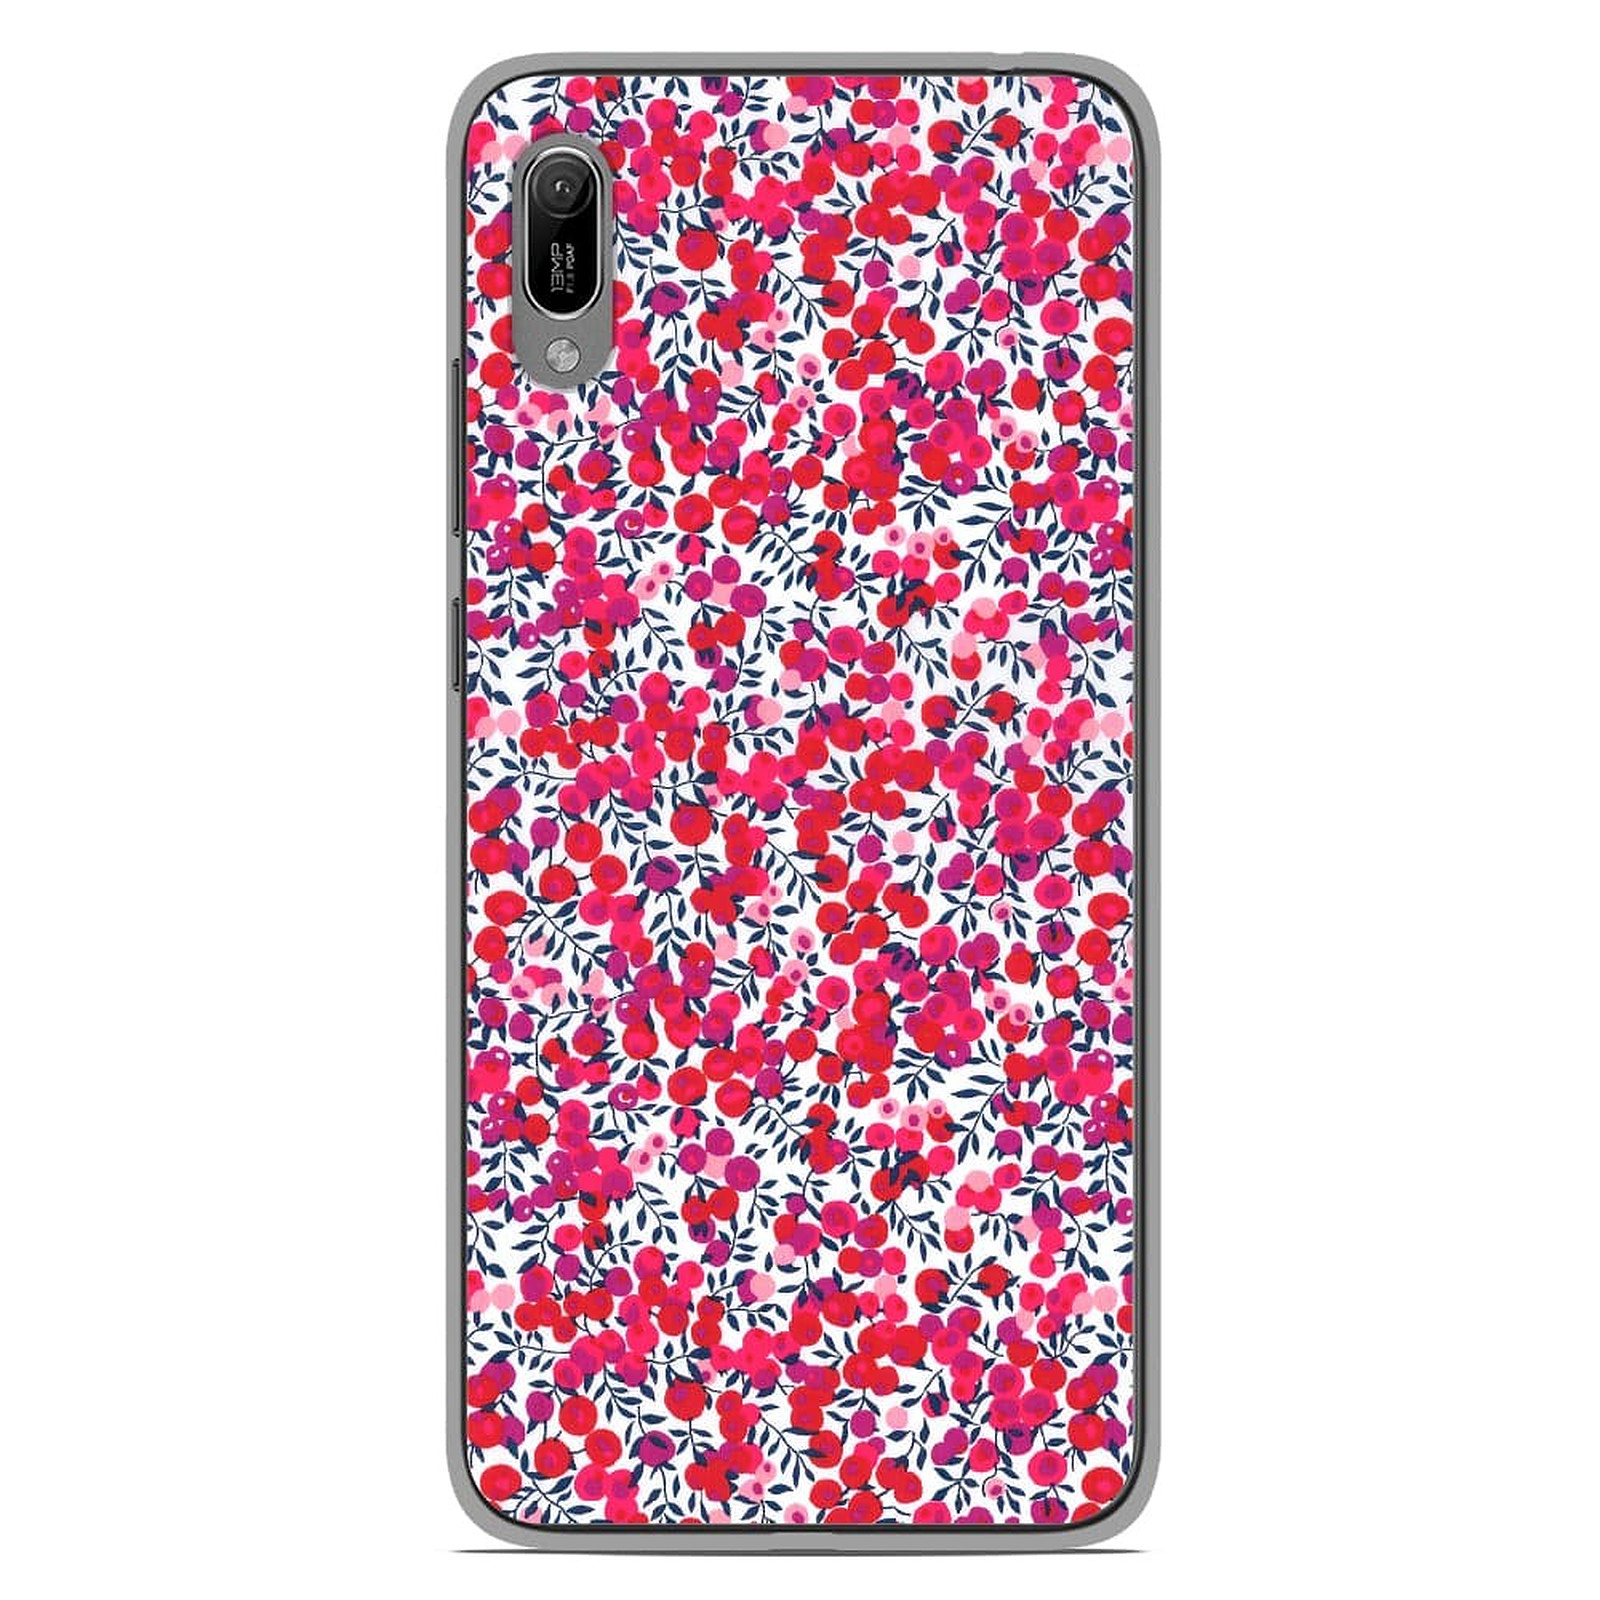 1001 Coques Coque silicone gel Huawei Y6 2019 motif Liberty Wiltshire Rouge - Coque telephone 1001Coques